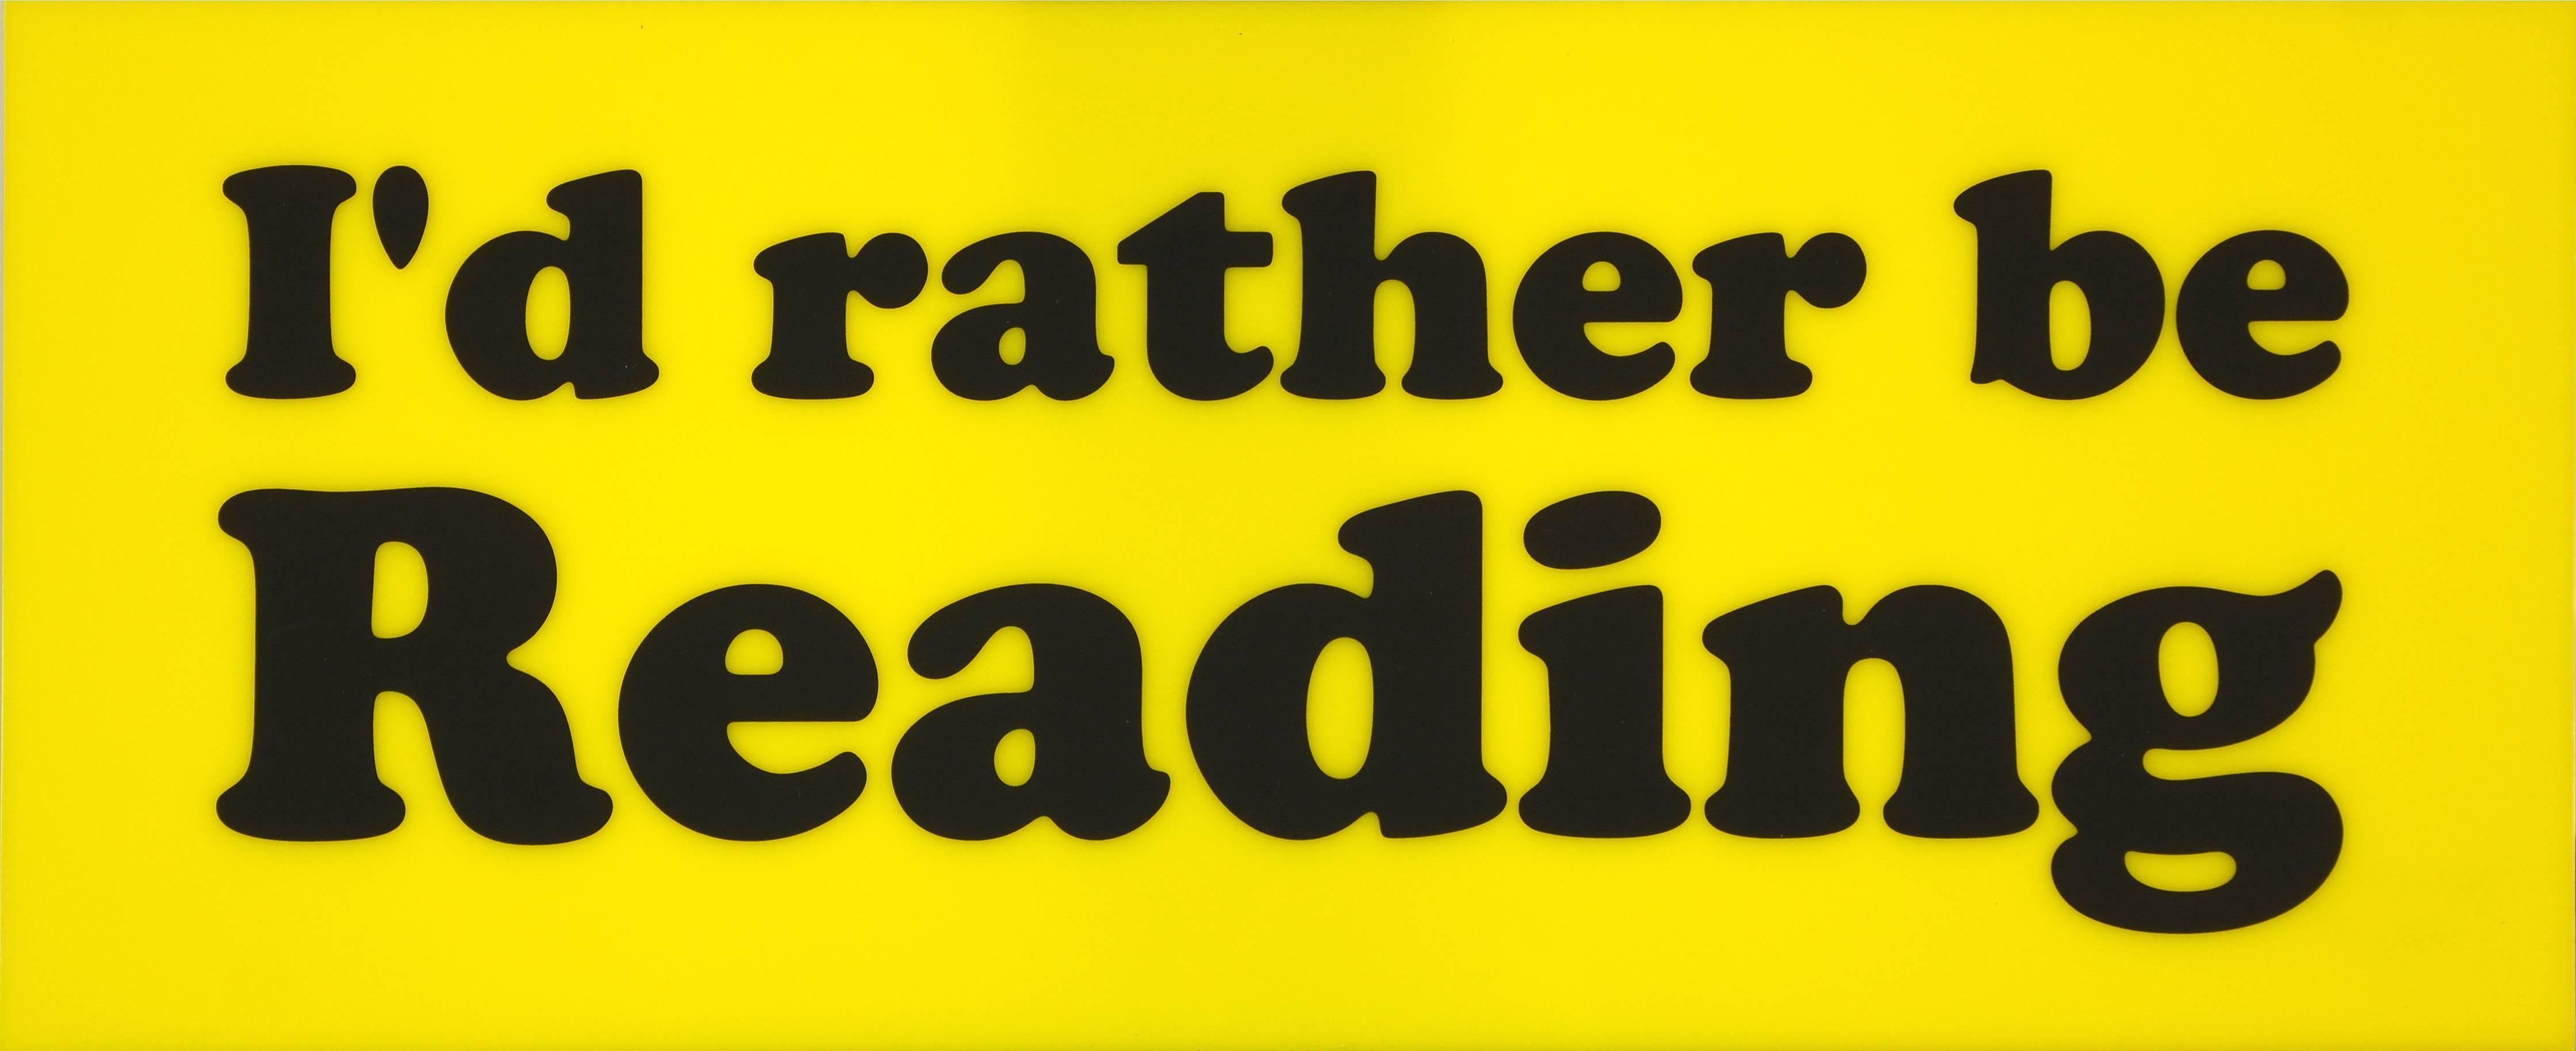 I’d Rather be Reading (yellow) - Print by Jeremy Deller